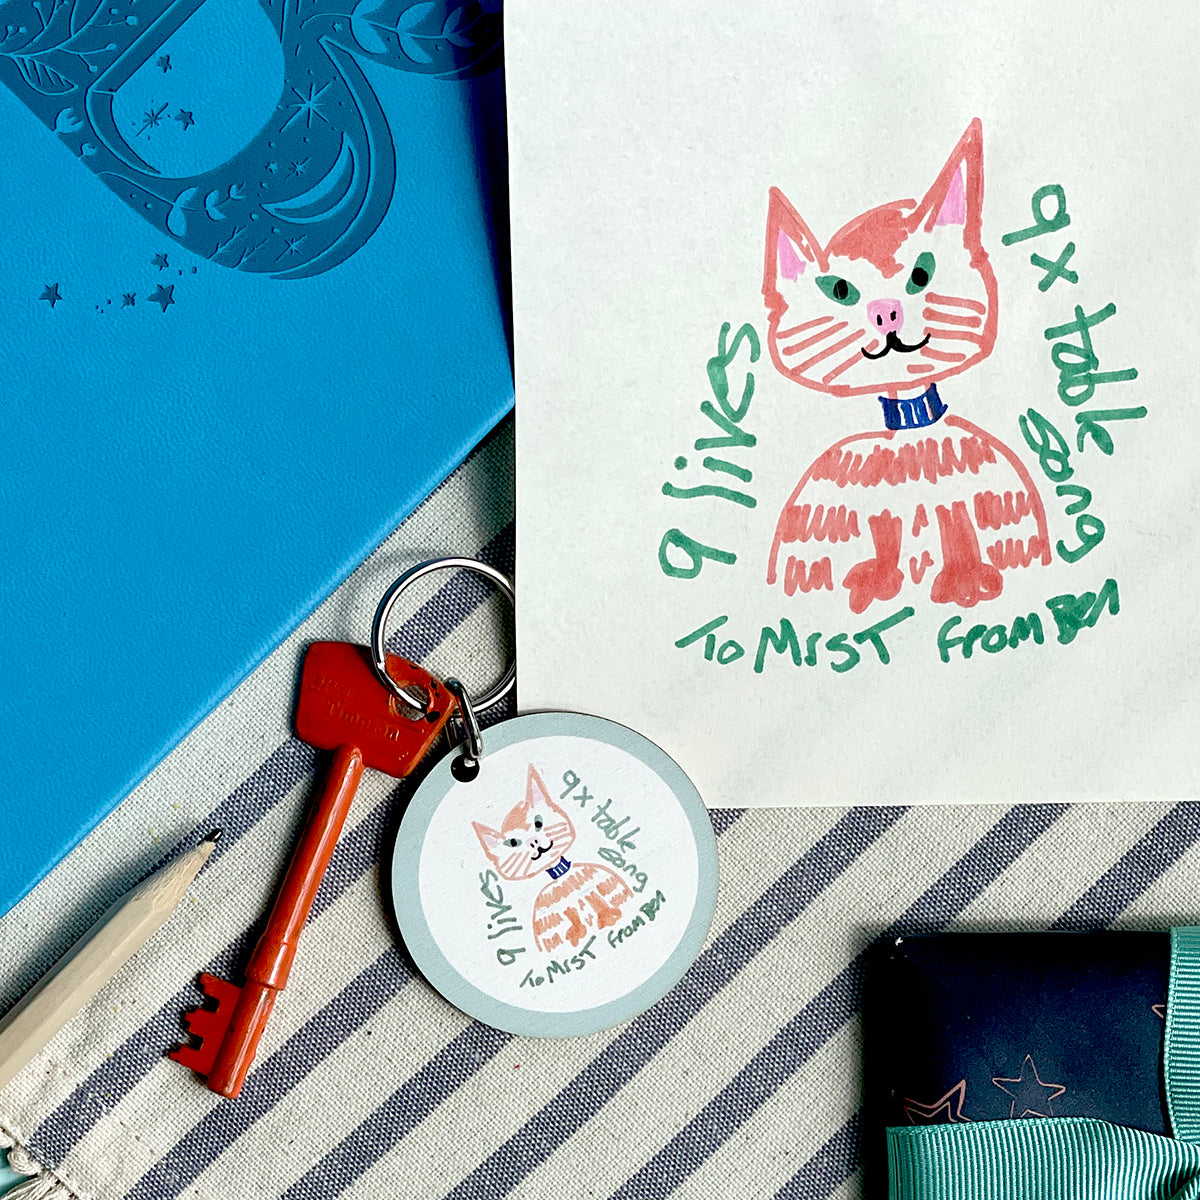 Picture of a child's felt tip drawing and then a wooden keyring printed with the same drawing